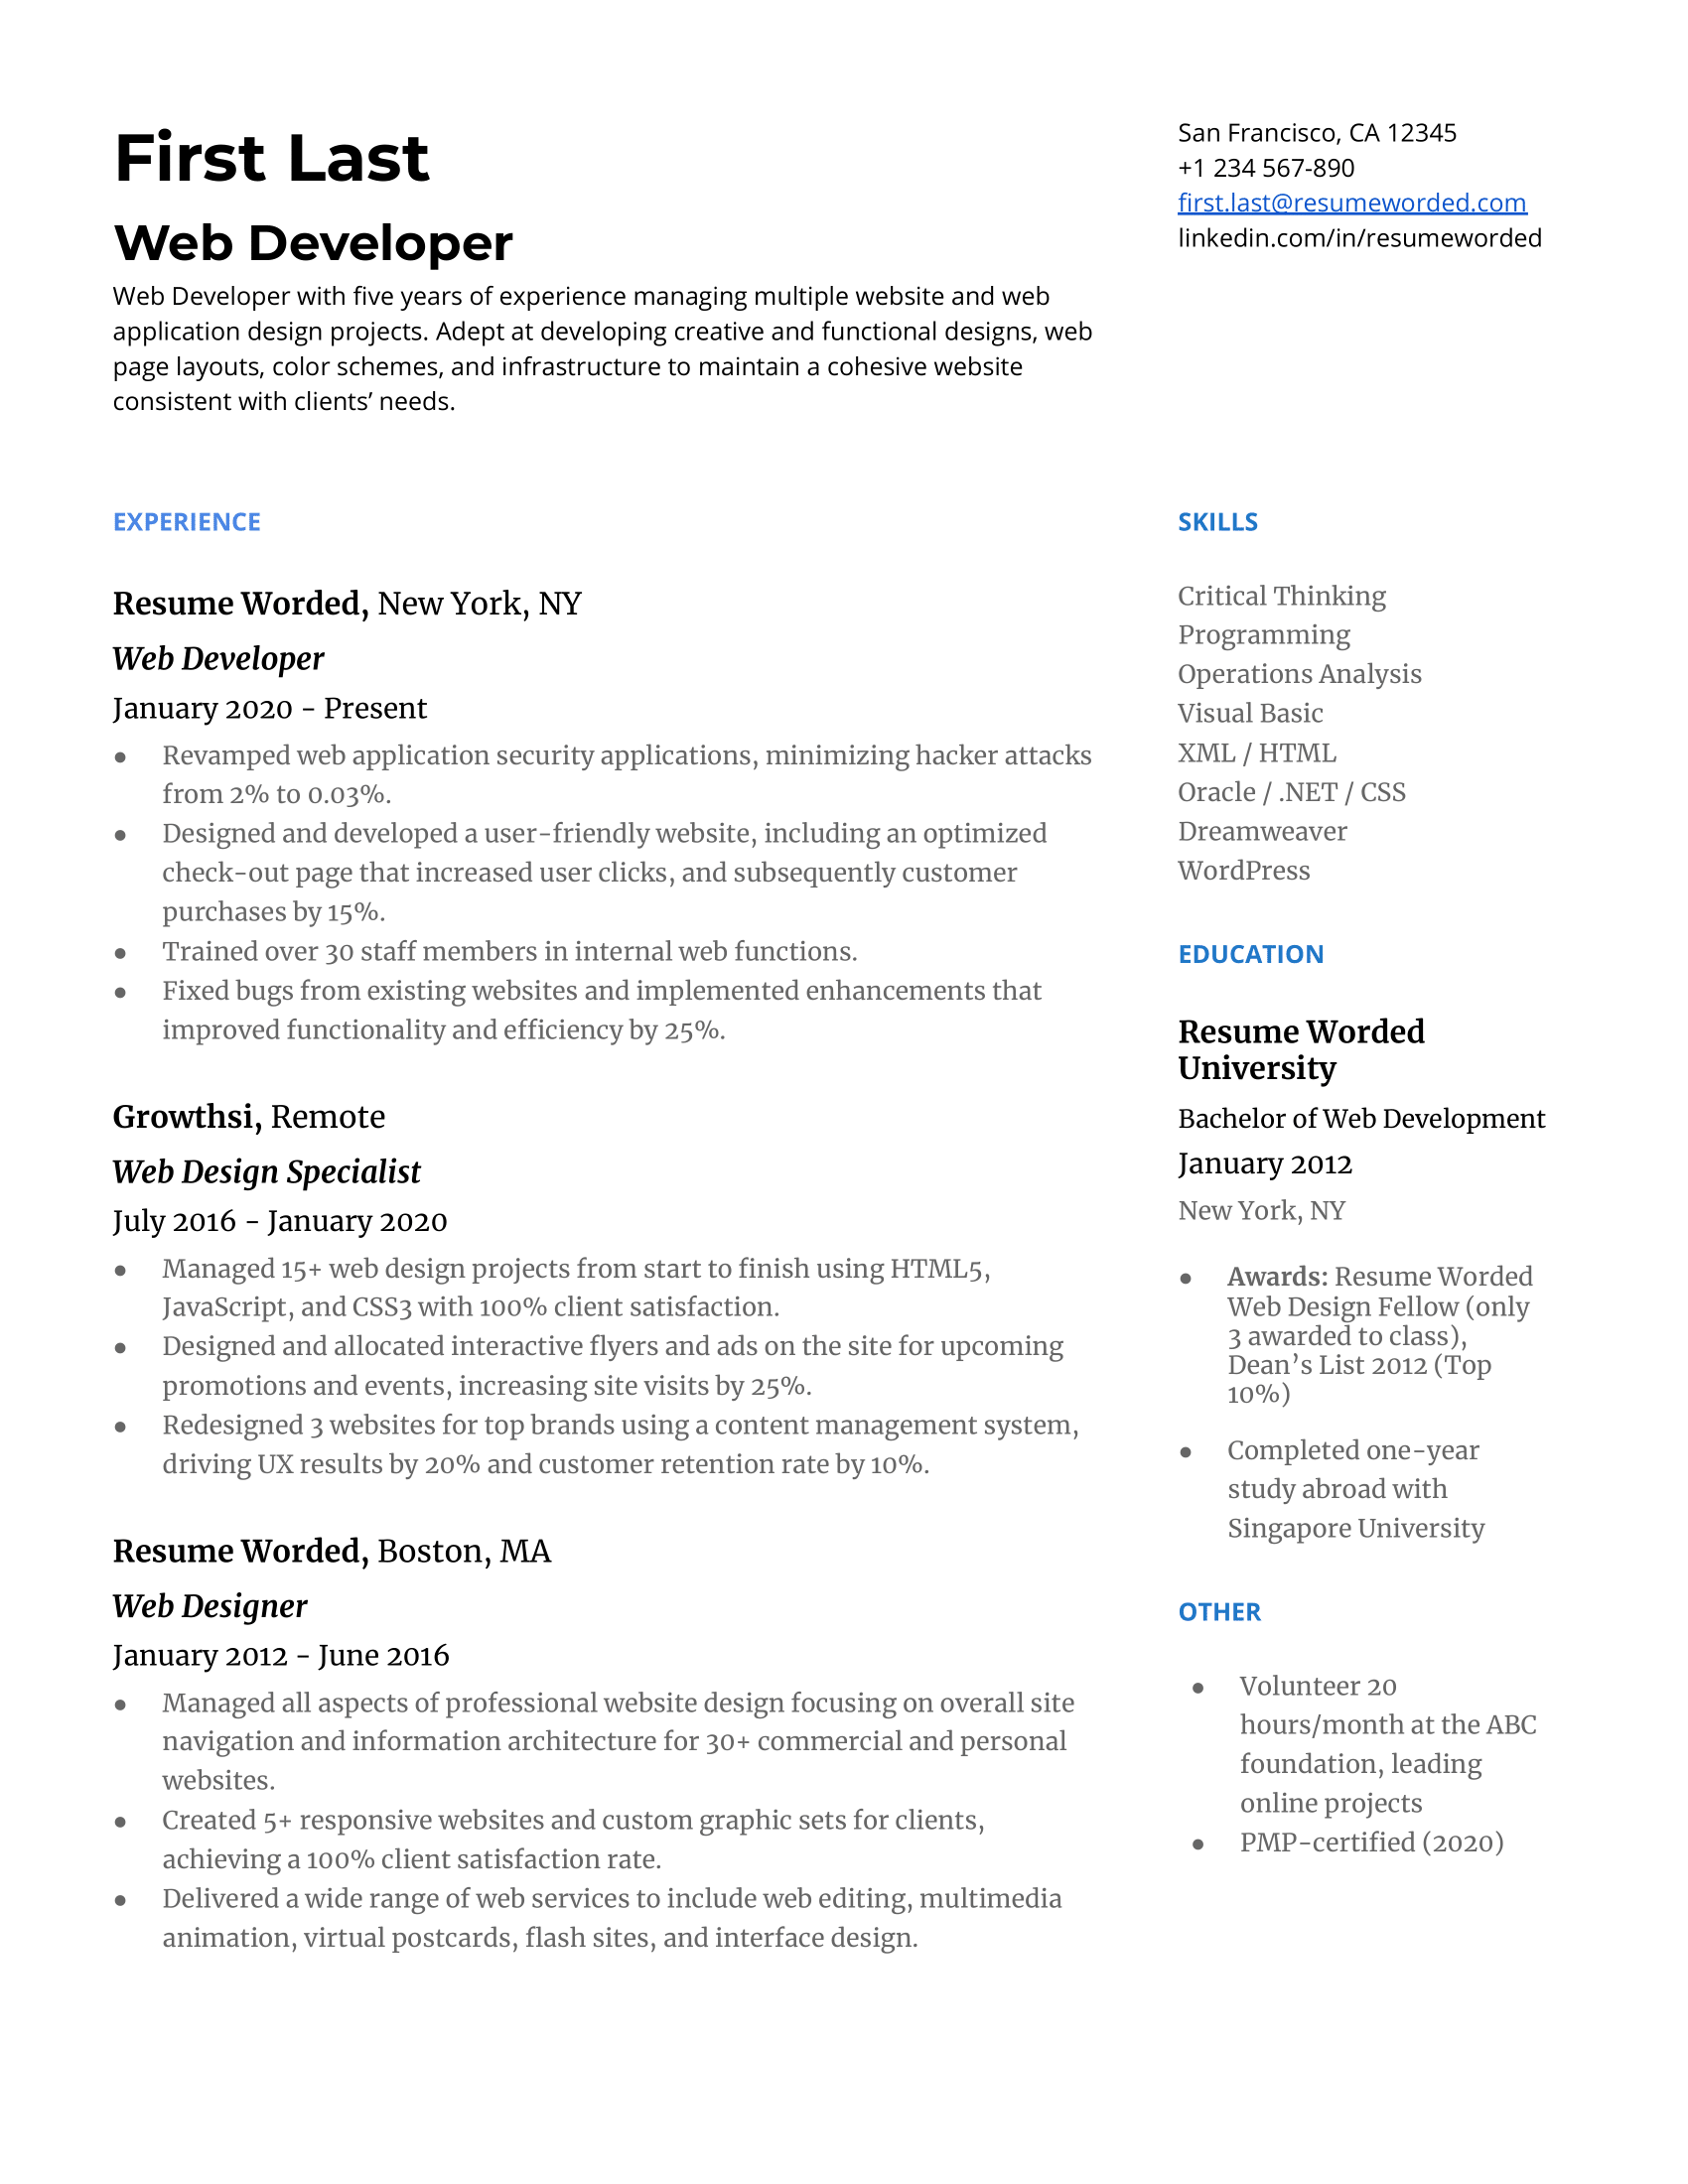 Web Developer resume with technical skills and projects highlighted